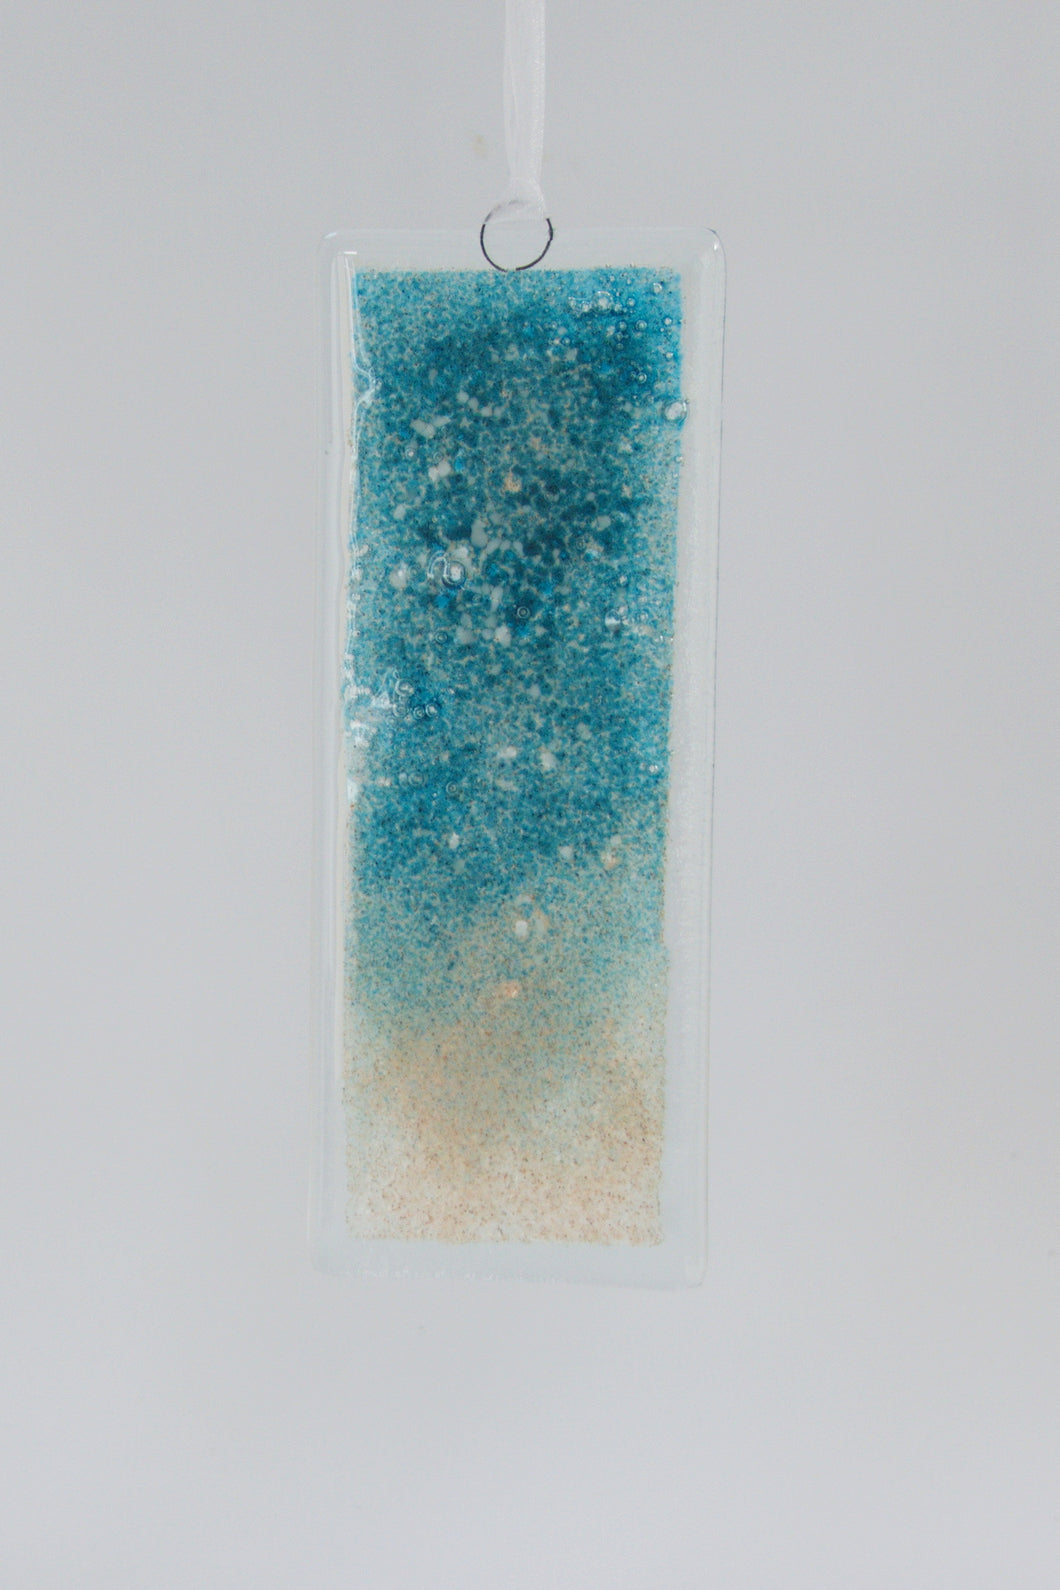 Small Ocean Fused glass hanging by Flow Glass Orkney Islands Scotland